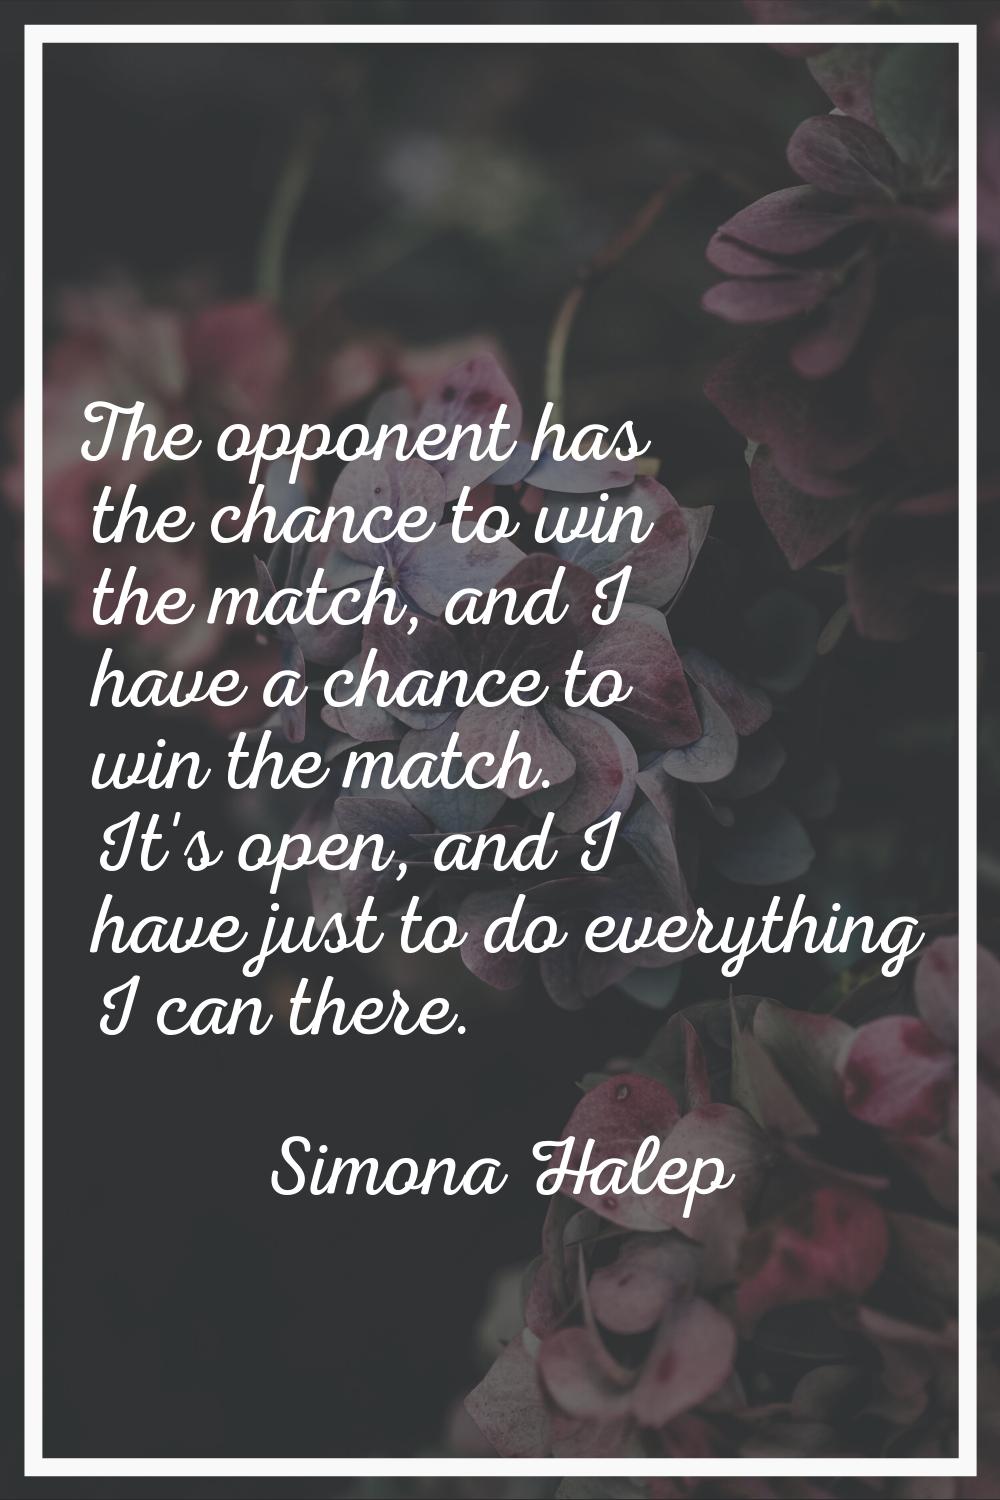 The opponent has the chance to win the match, and I have a chance to win the match. It's open, and 